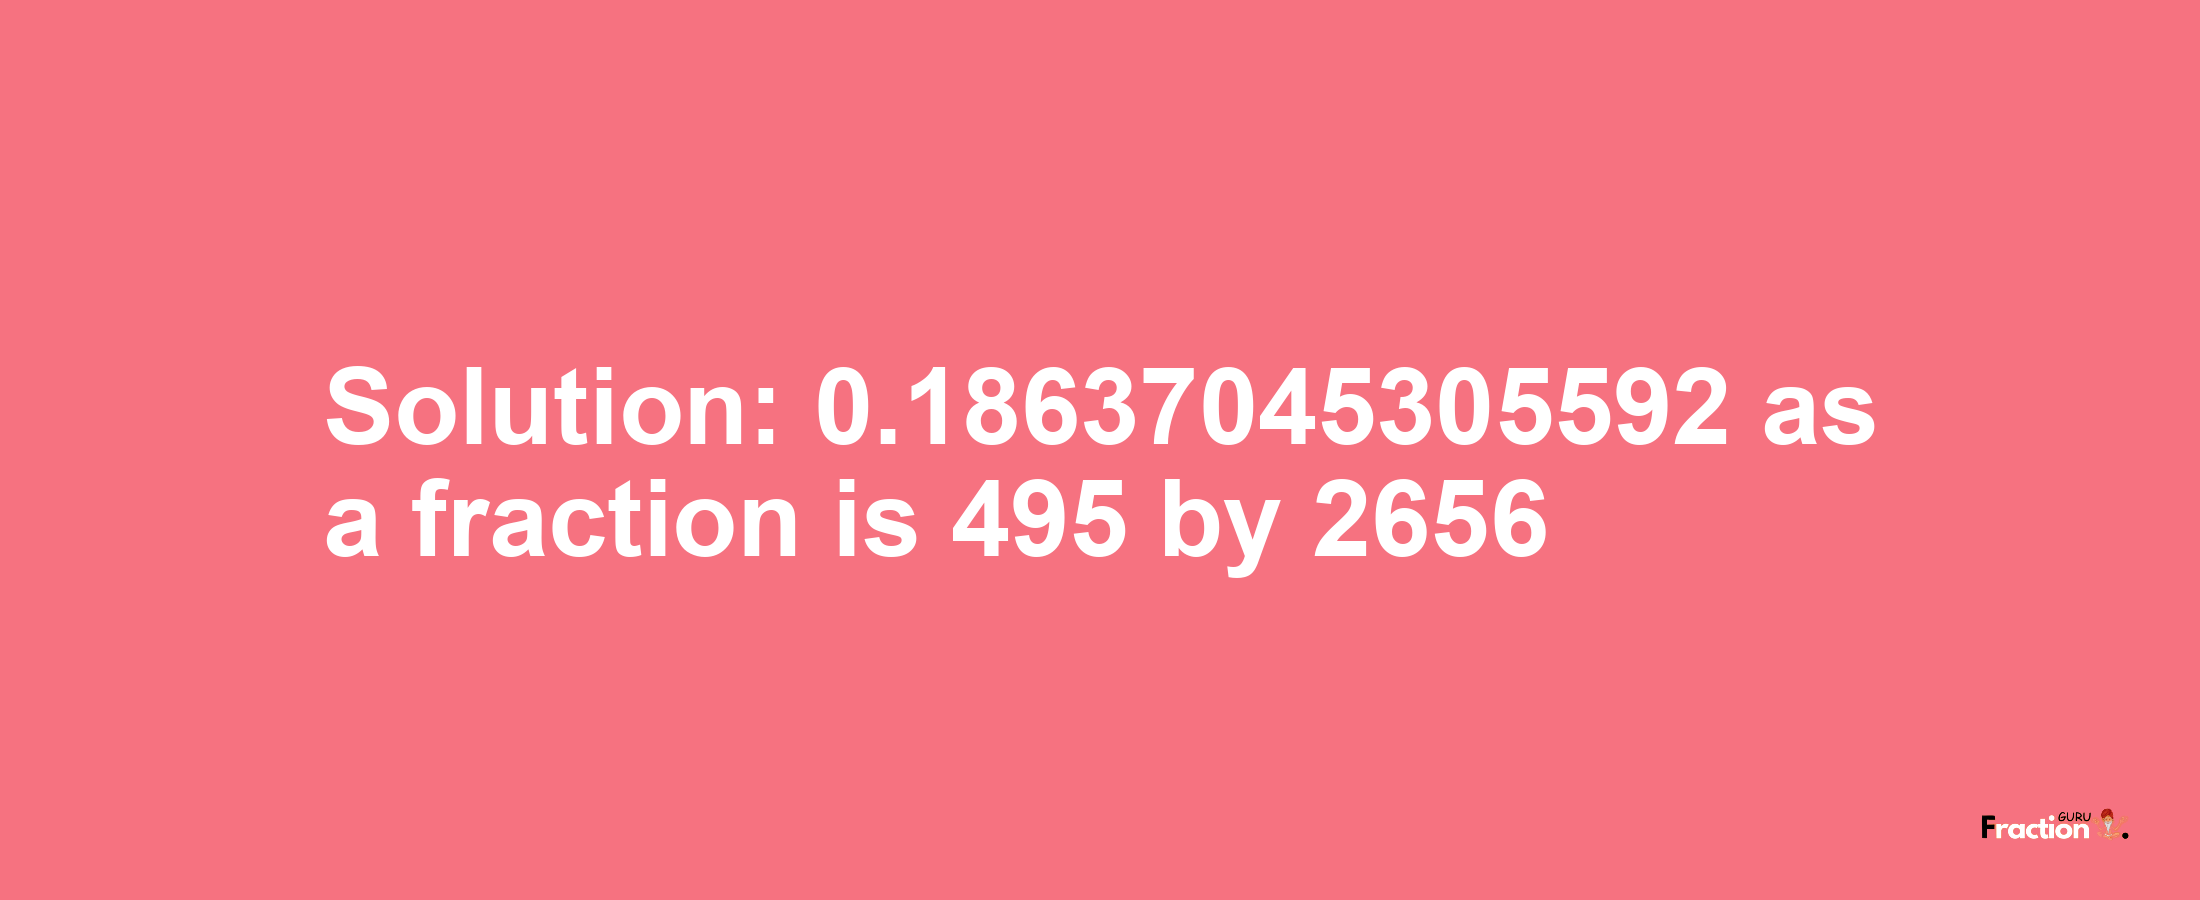 Solution:0.18637045305592 as a fraction is 495/2656